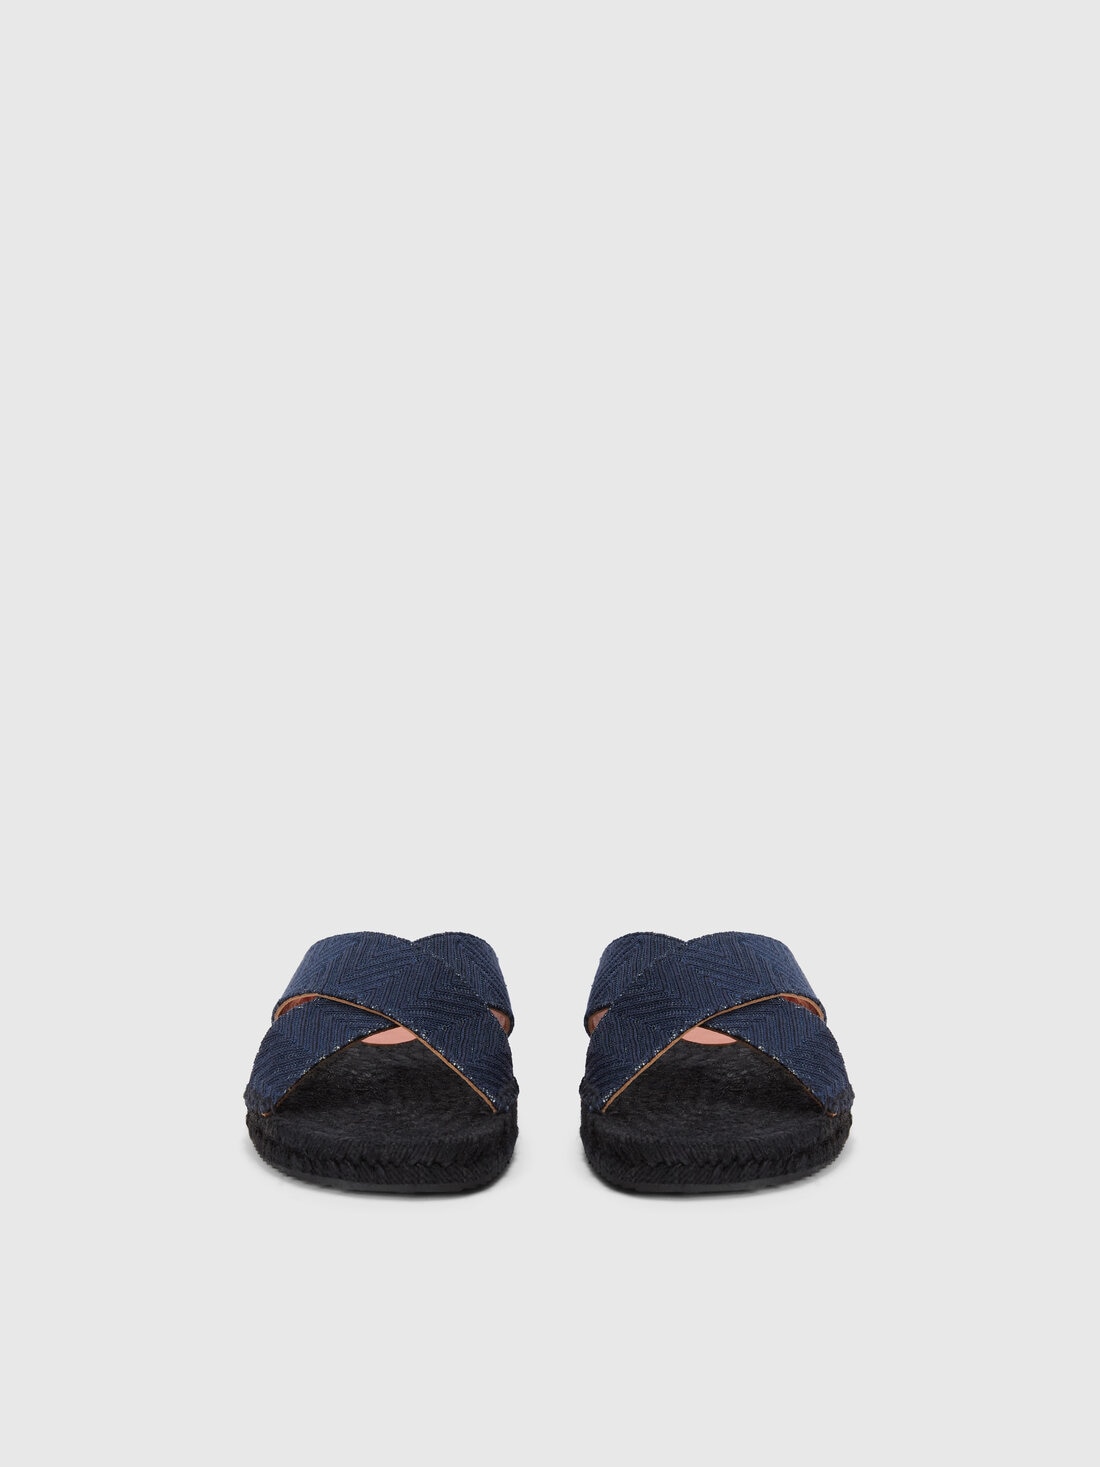 Slippers with double crossed strap and chevron pattern   , Navy Blue  - LS24SY00BV00FZS30DO - 2